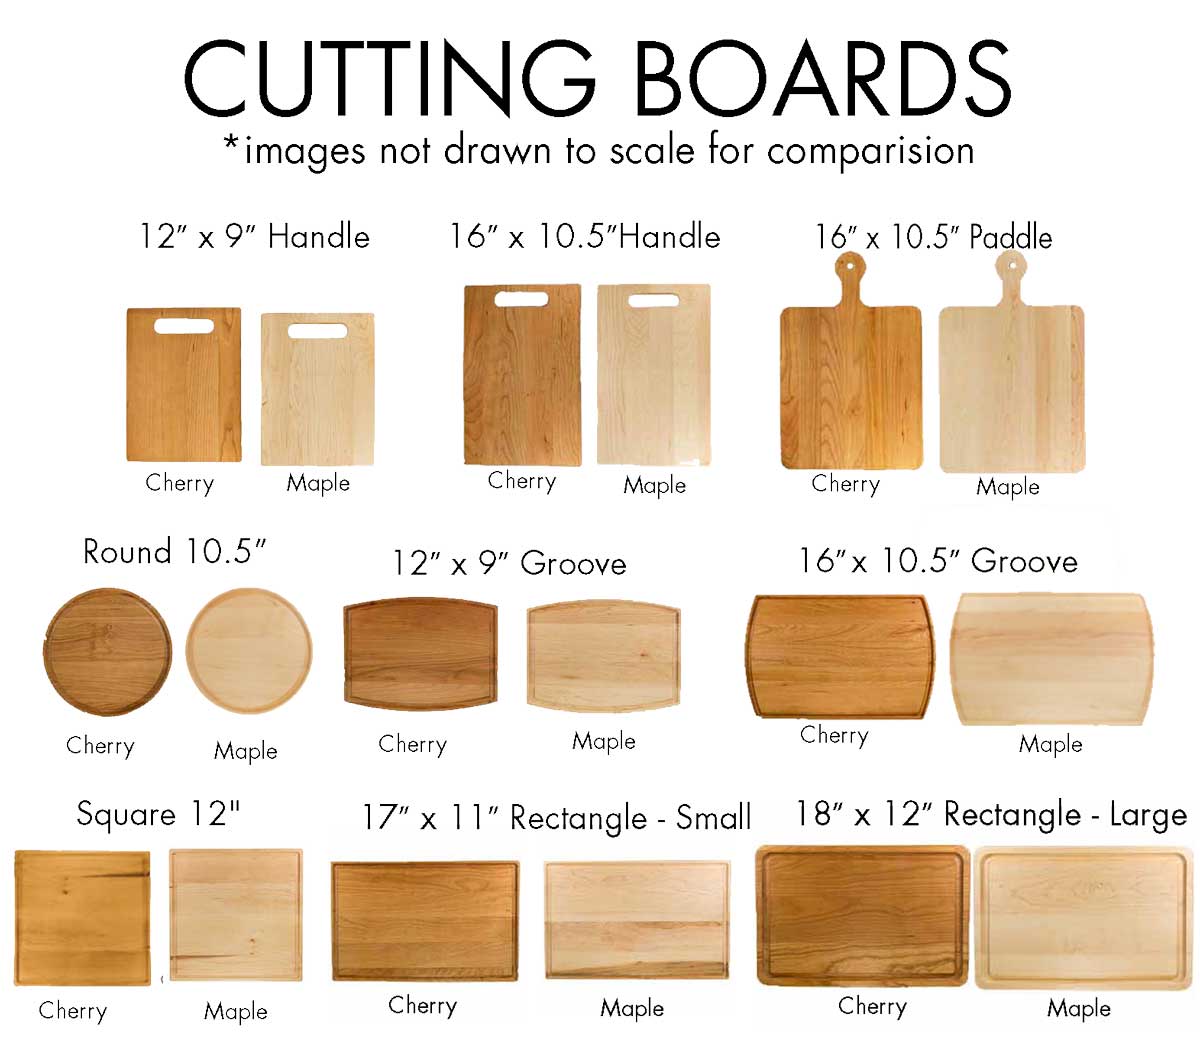 https://www.twofunnygirls.com/wp-content/uploads/2020/11/all-images-cutting-board.jpg